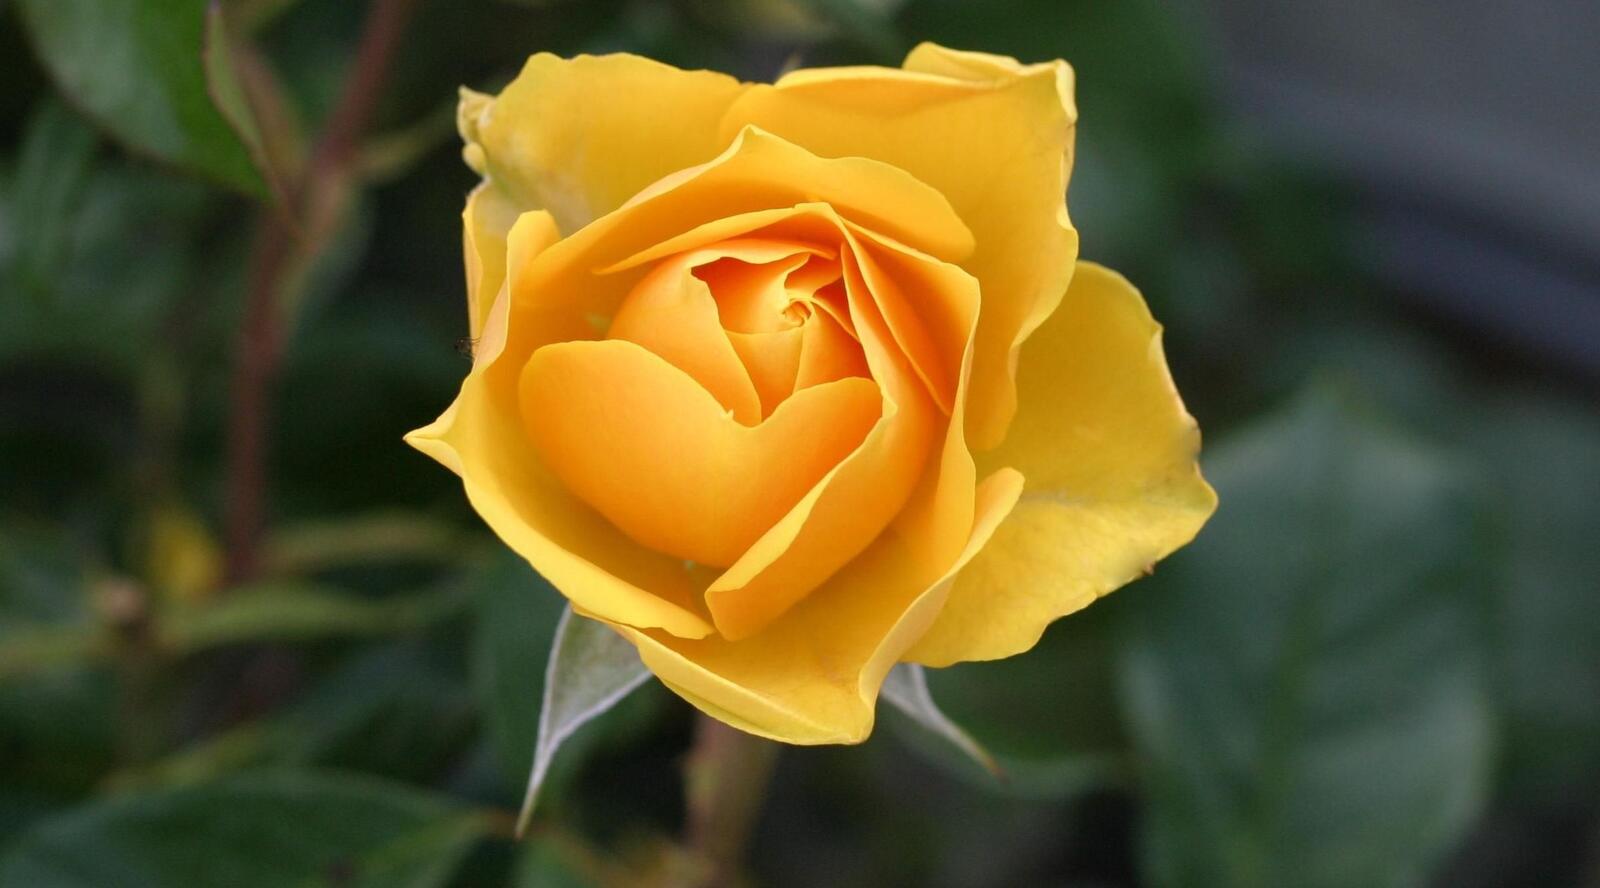 Wallpapers flower yellow rose on the desktop